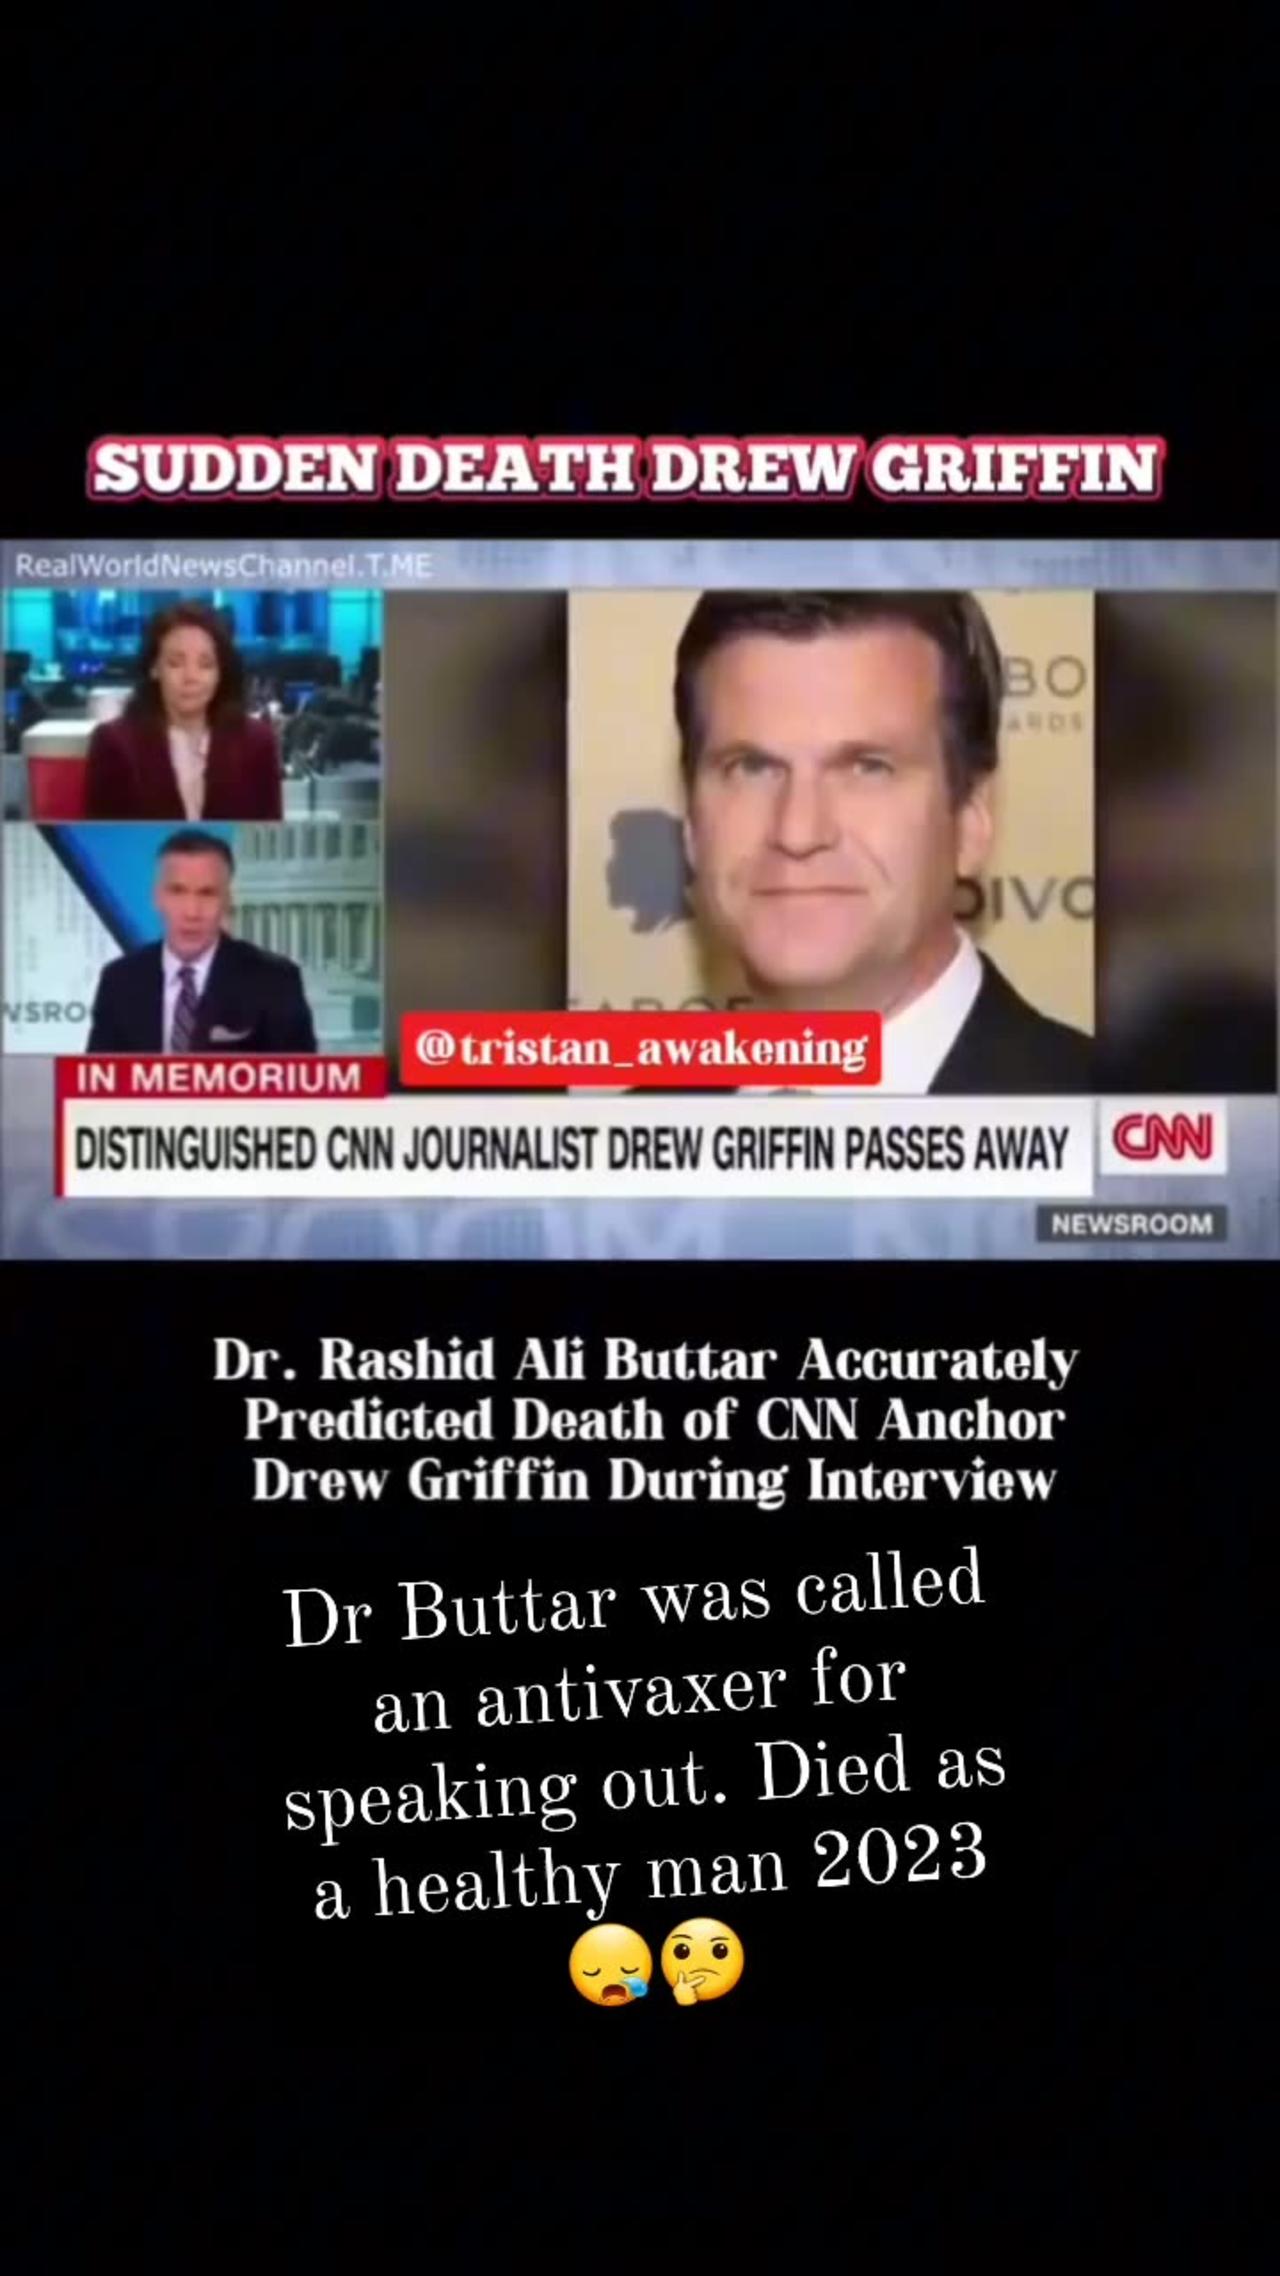 Dr. Rashid Ali Buttar Accurately Predicted Death of CNN Anchor Drew Griffin During Interview!